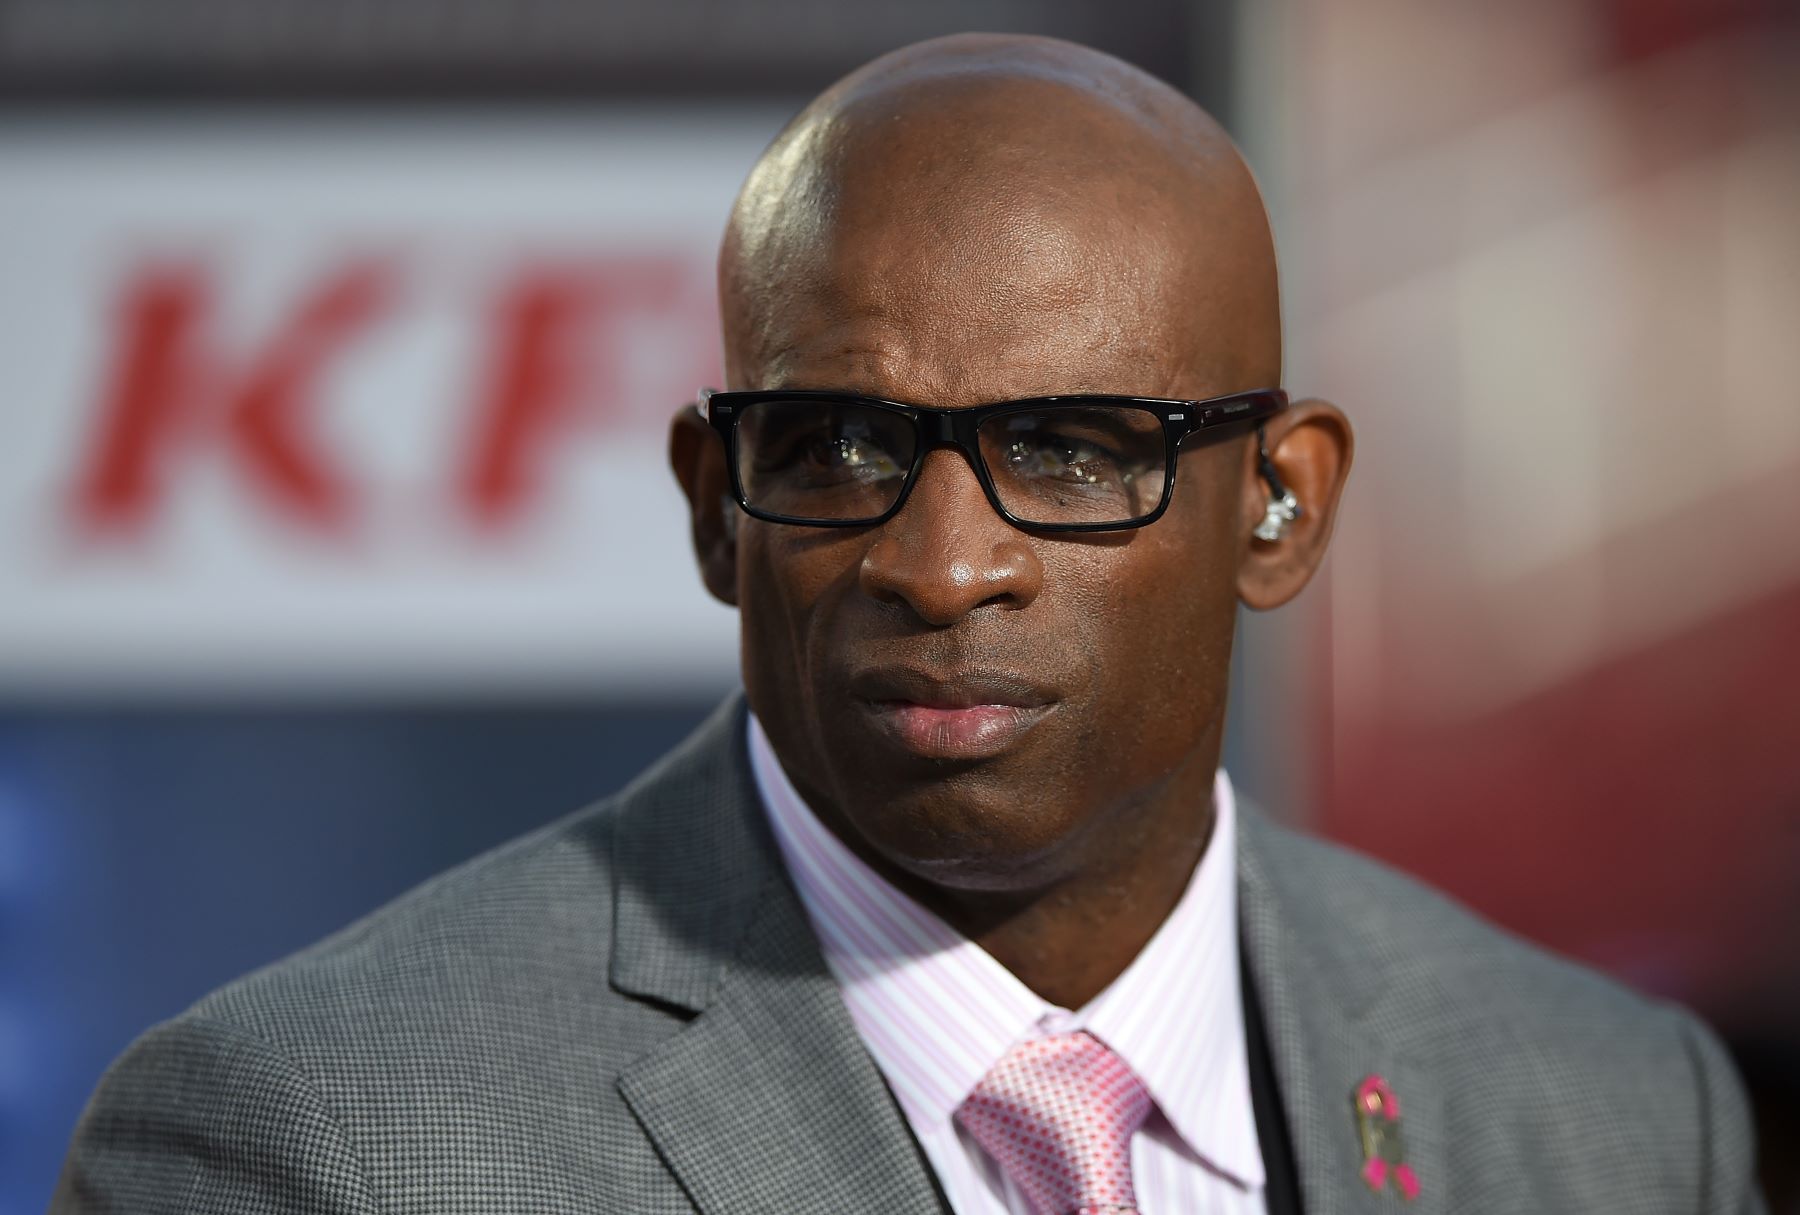 Deion Sanders Enjoyed His CBS Sports Tenure, Save His on-Air Feud With Boomer Esiason: ‘It Wasn’t an Act and It Wasn’t Fun’